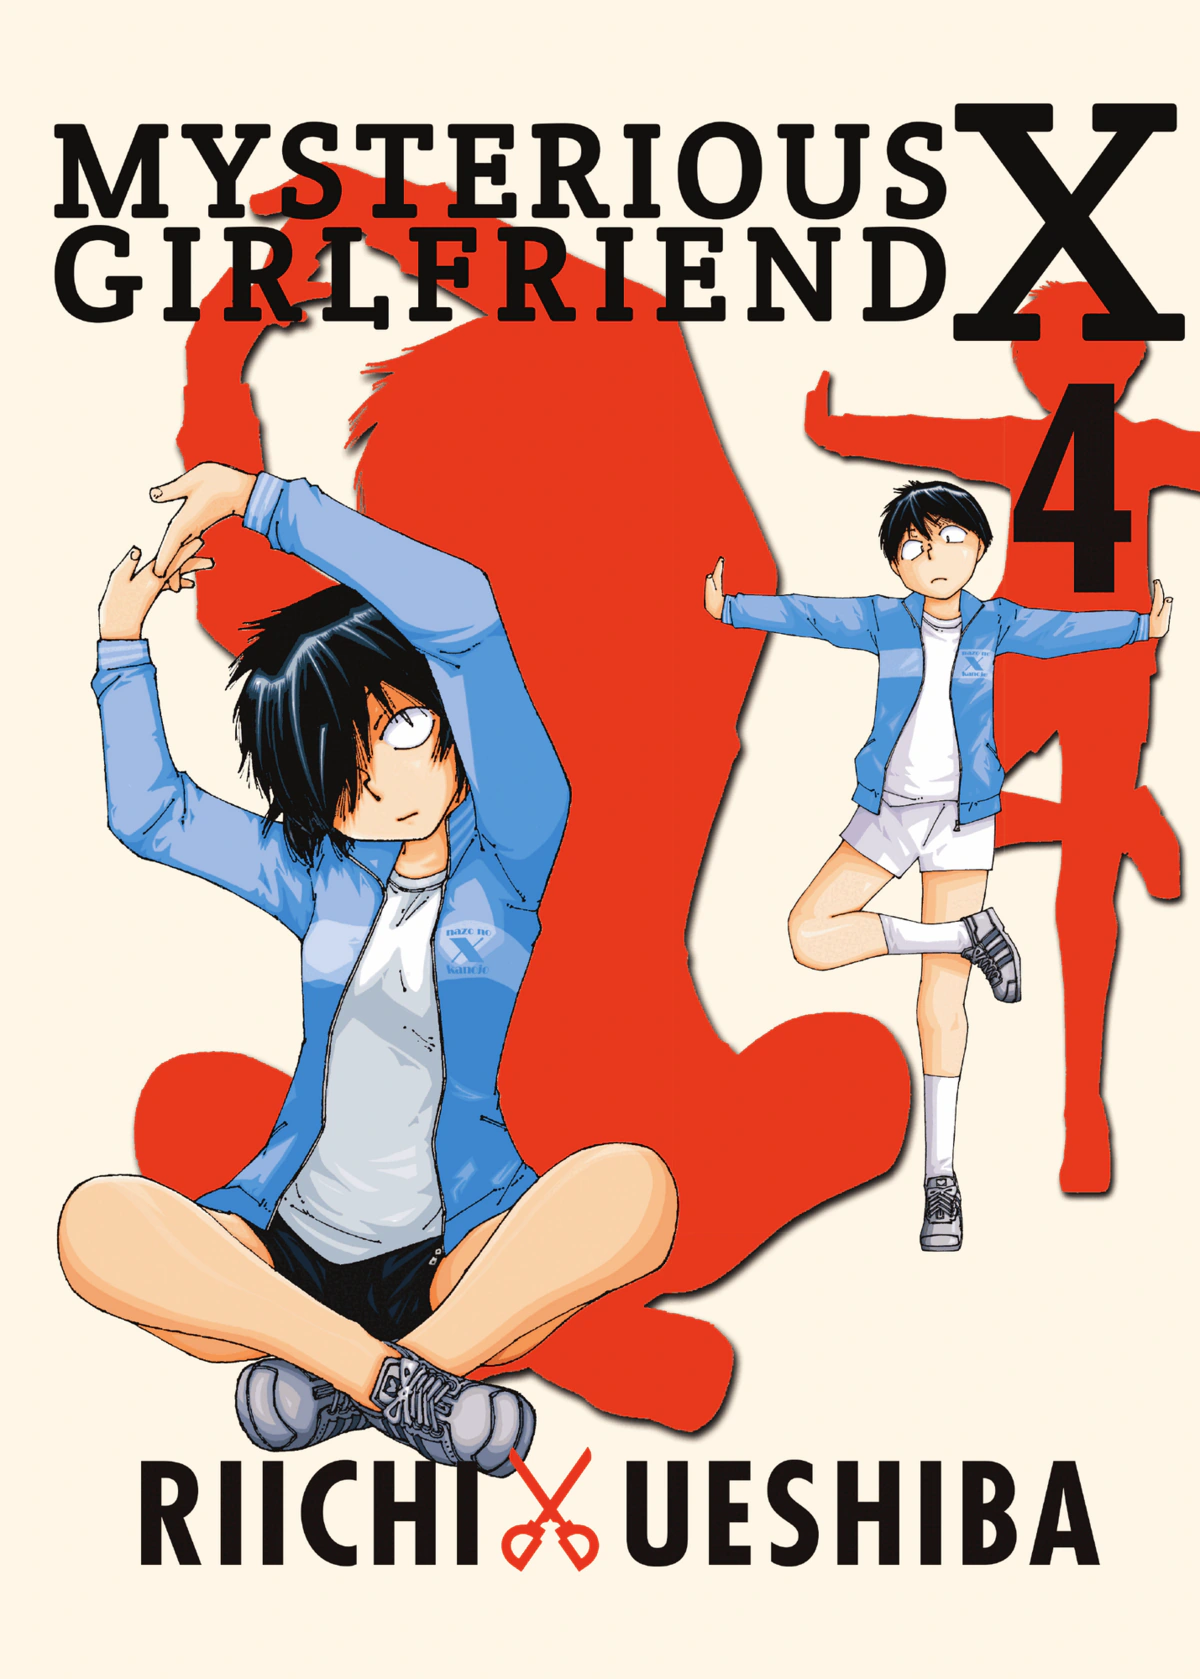 Mysterious Girlfriend X VOD pt. 1 (3.7.20) : Free Download, Borrow